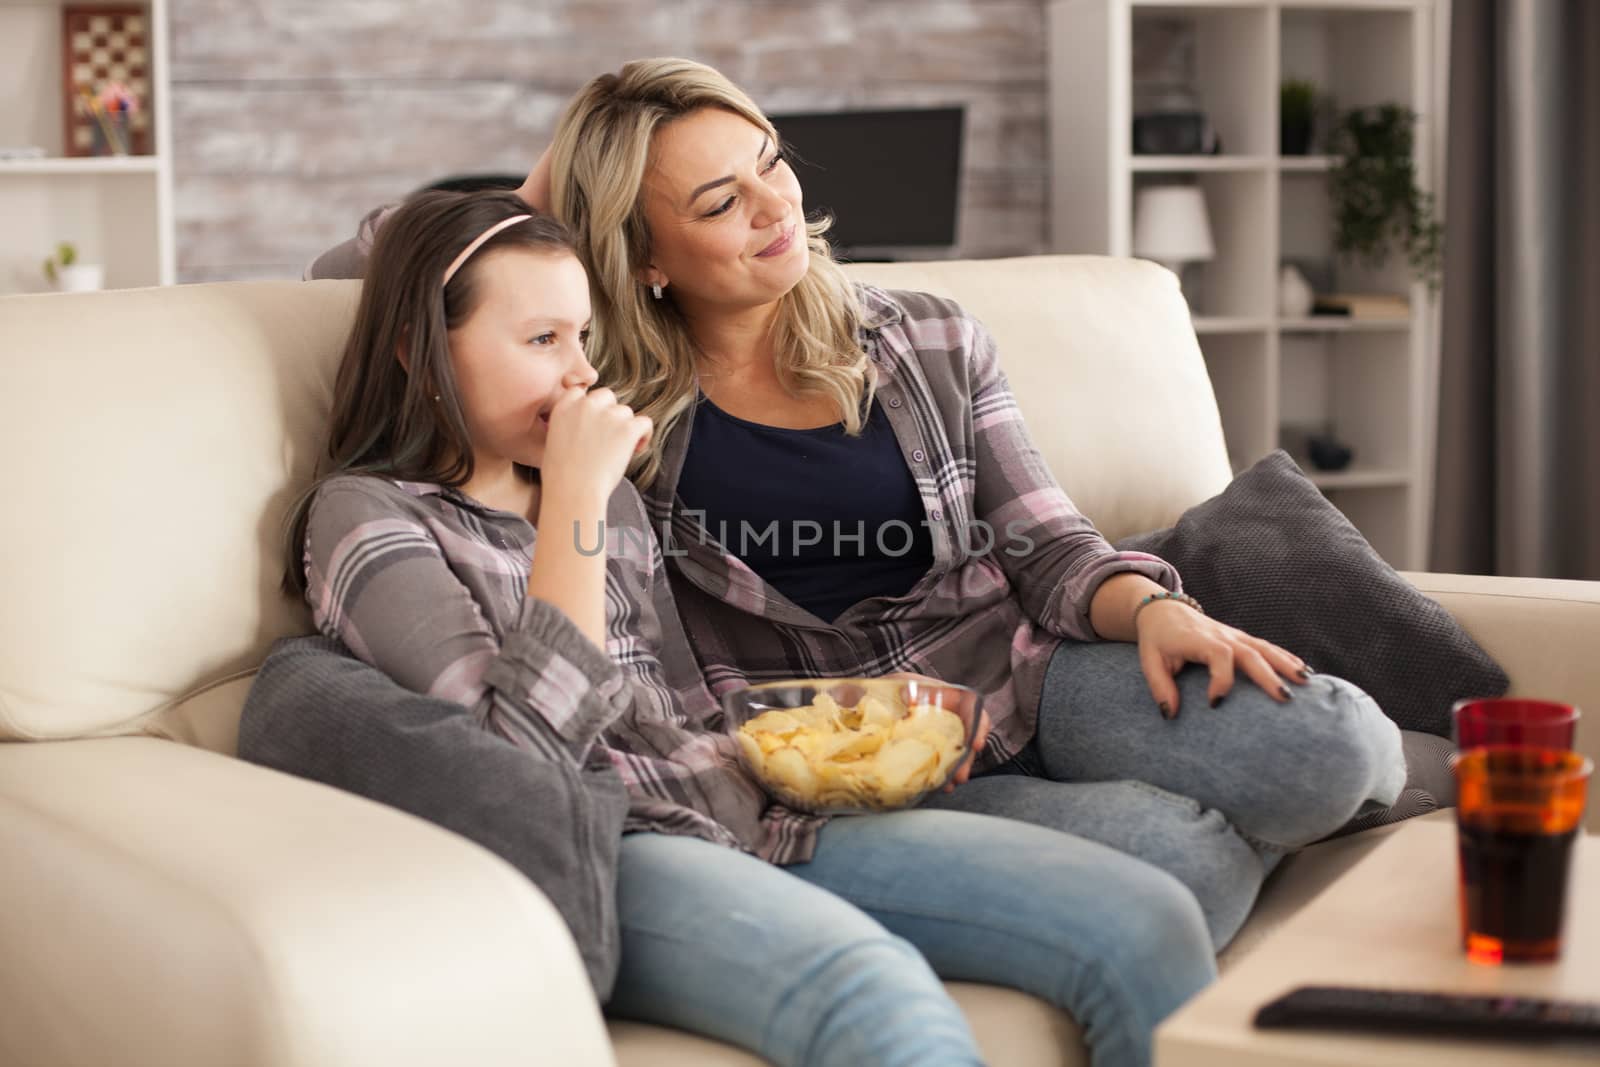 Cheerful daughter and her young mother relaxing watching a film on tv. Snacks and soda.